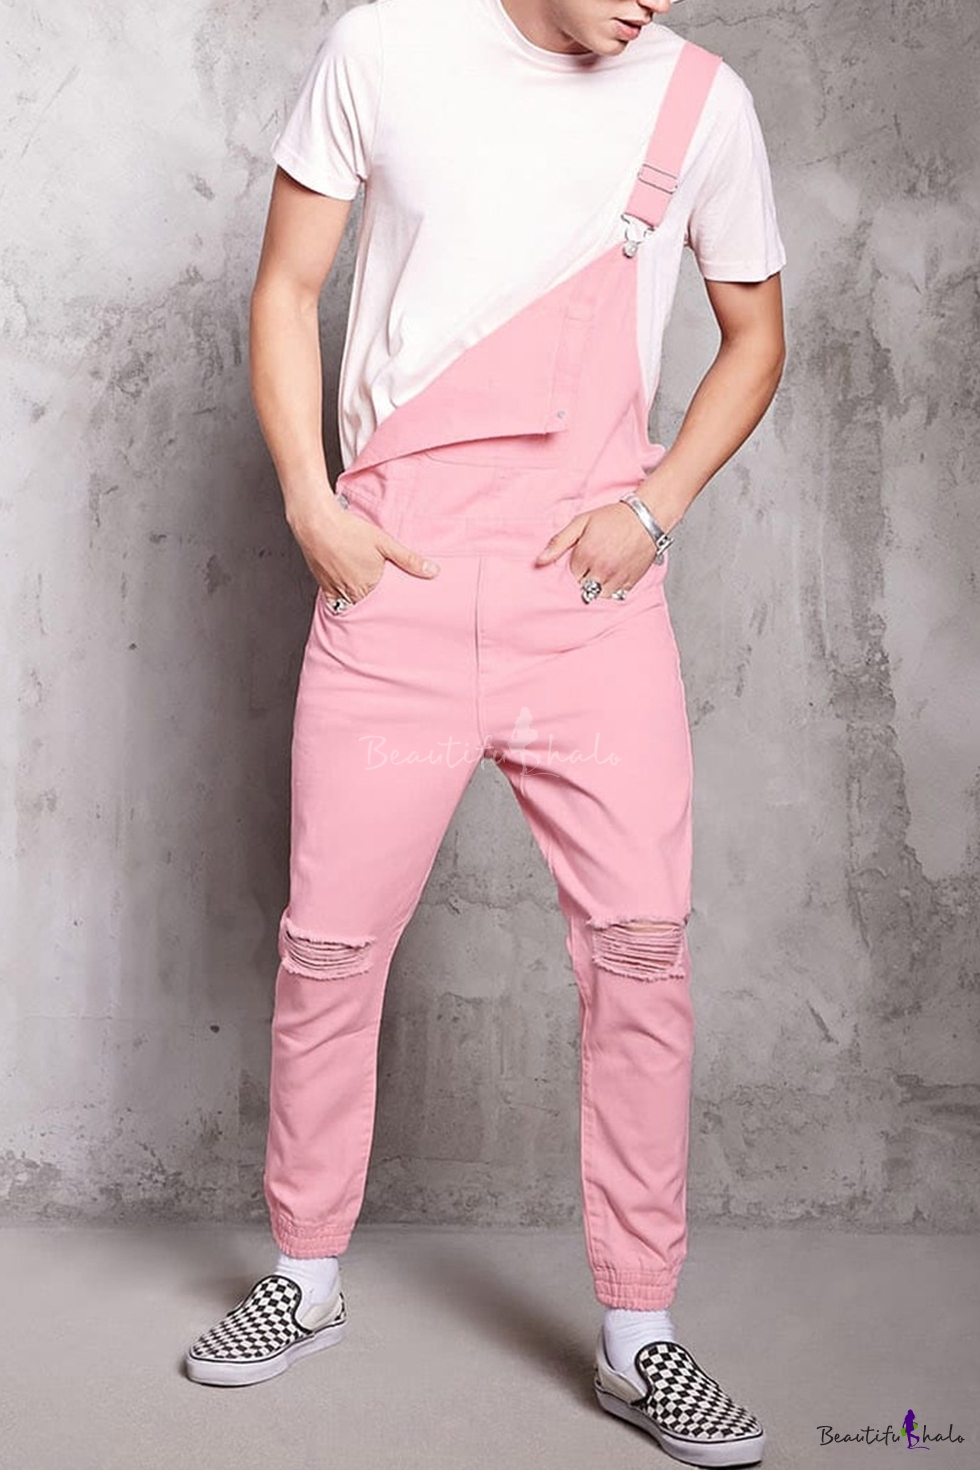 New Arrival Stylish Slim Fitted Pink Ripped Jeans Trendy Bib Overalls ...